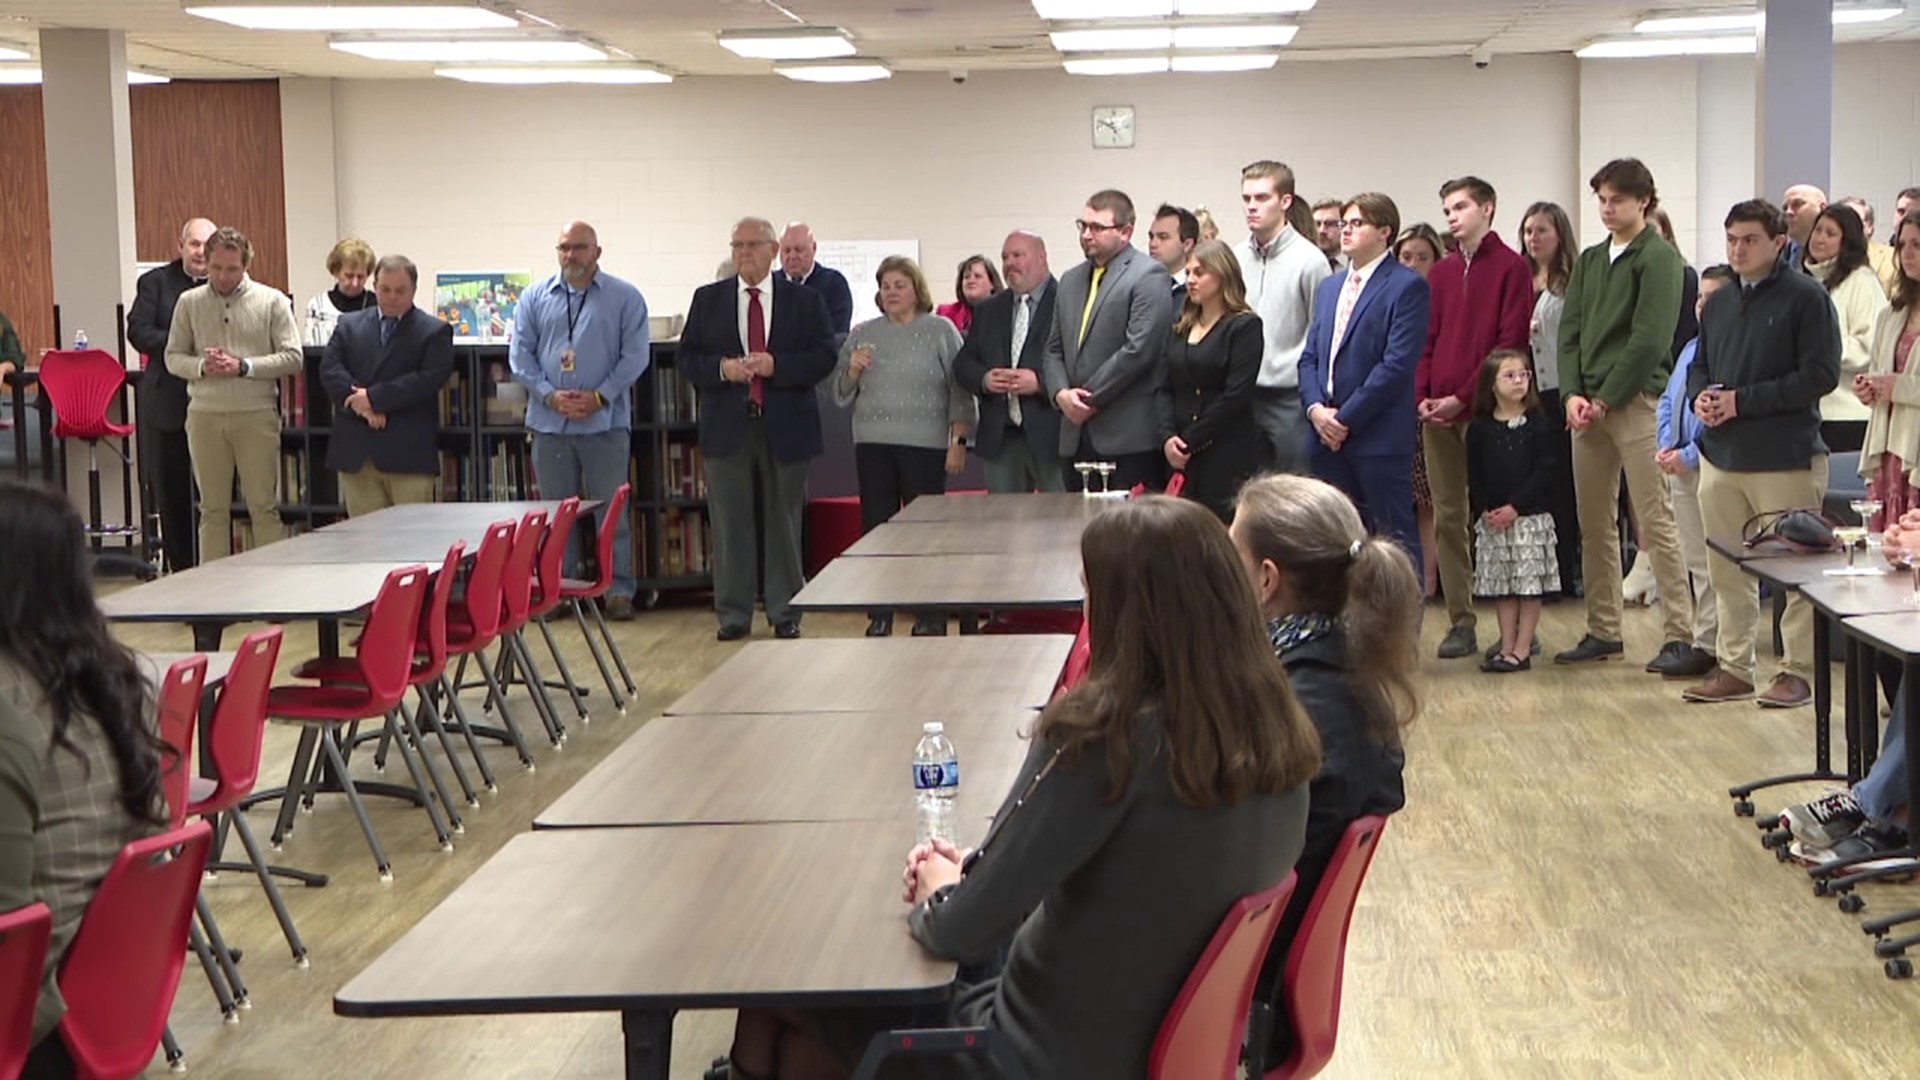 The Holy Redeemer High School in Wilkes-Barre celebrated the opening of its new digital learning center, dedicated to an education leader who passed away in 2019.